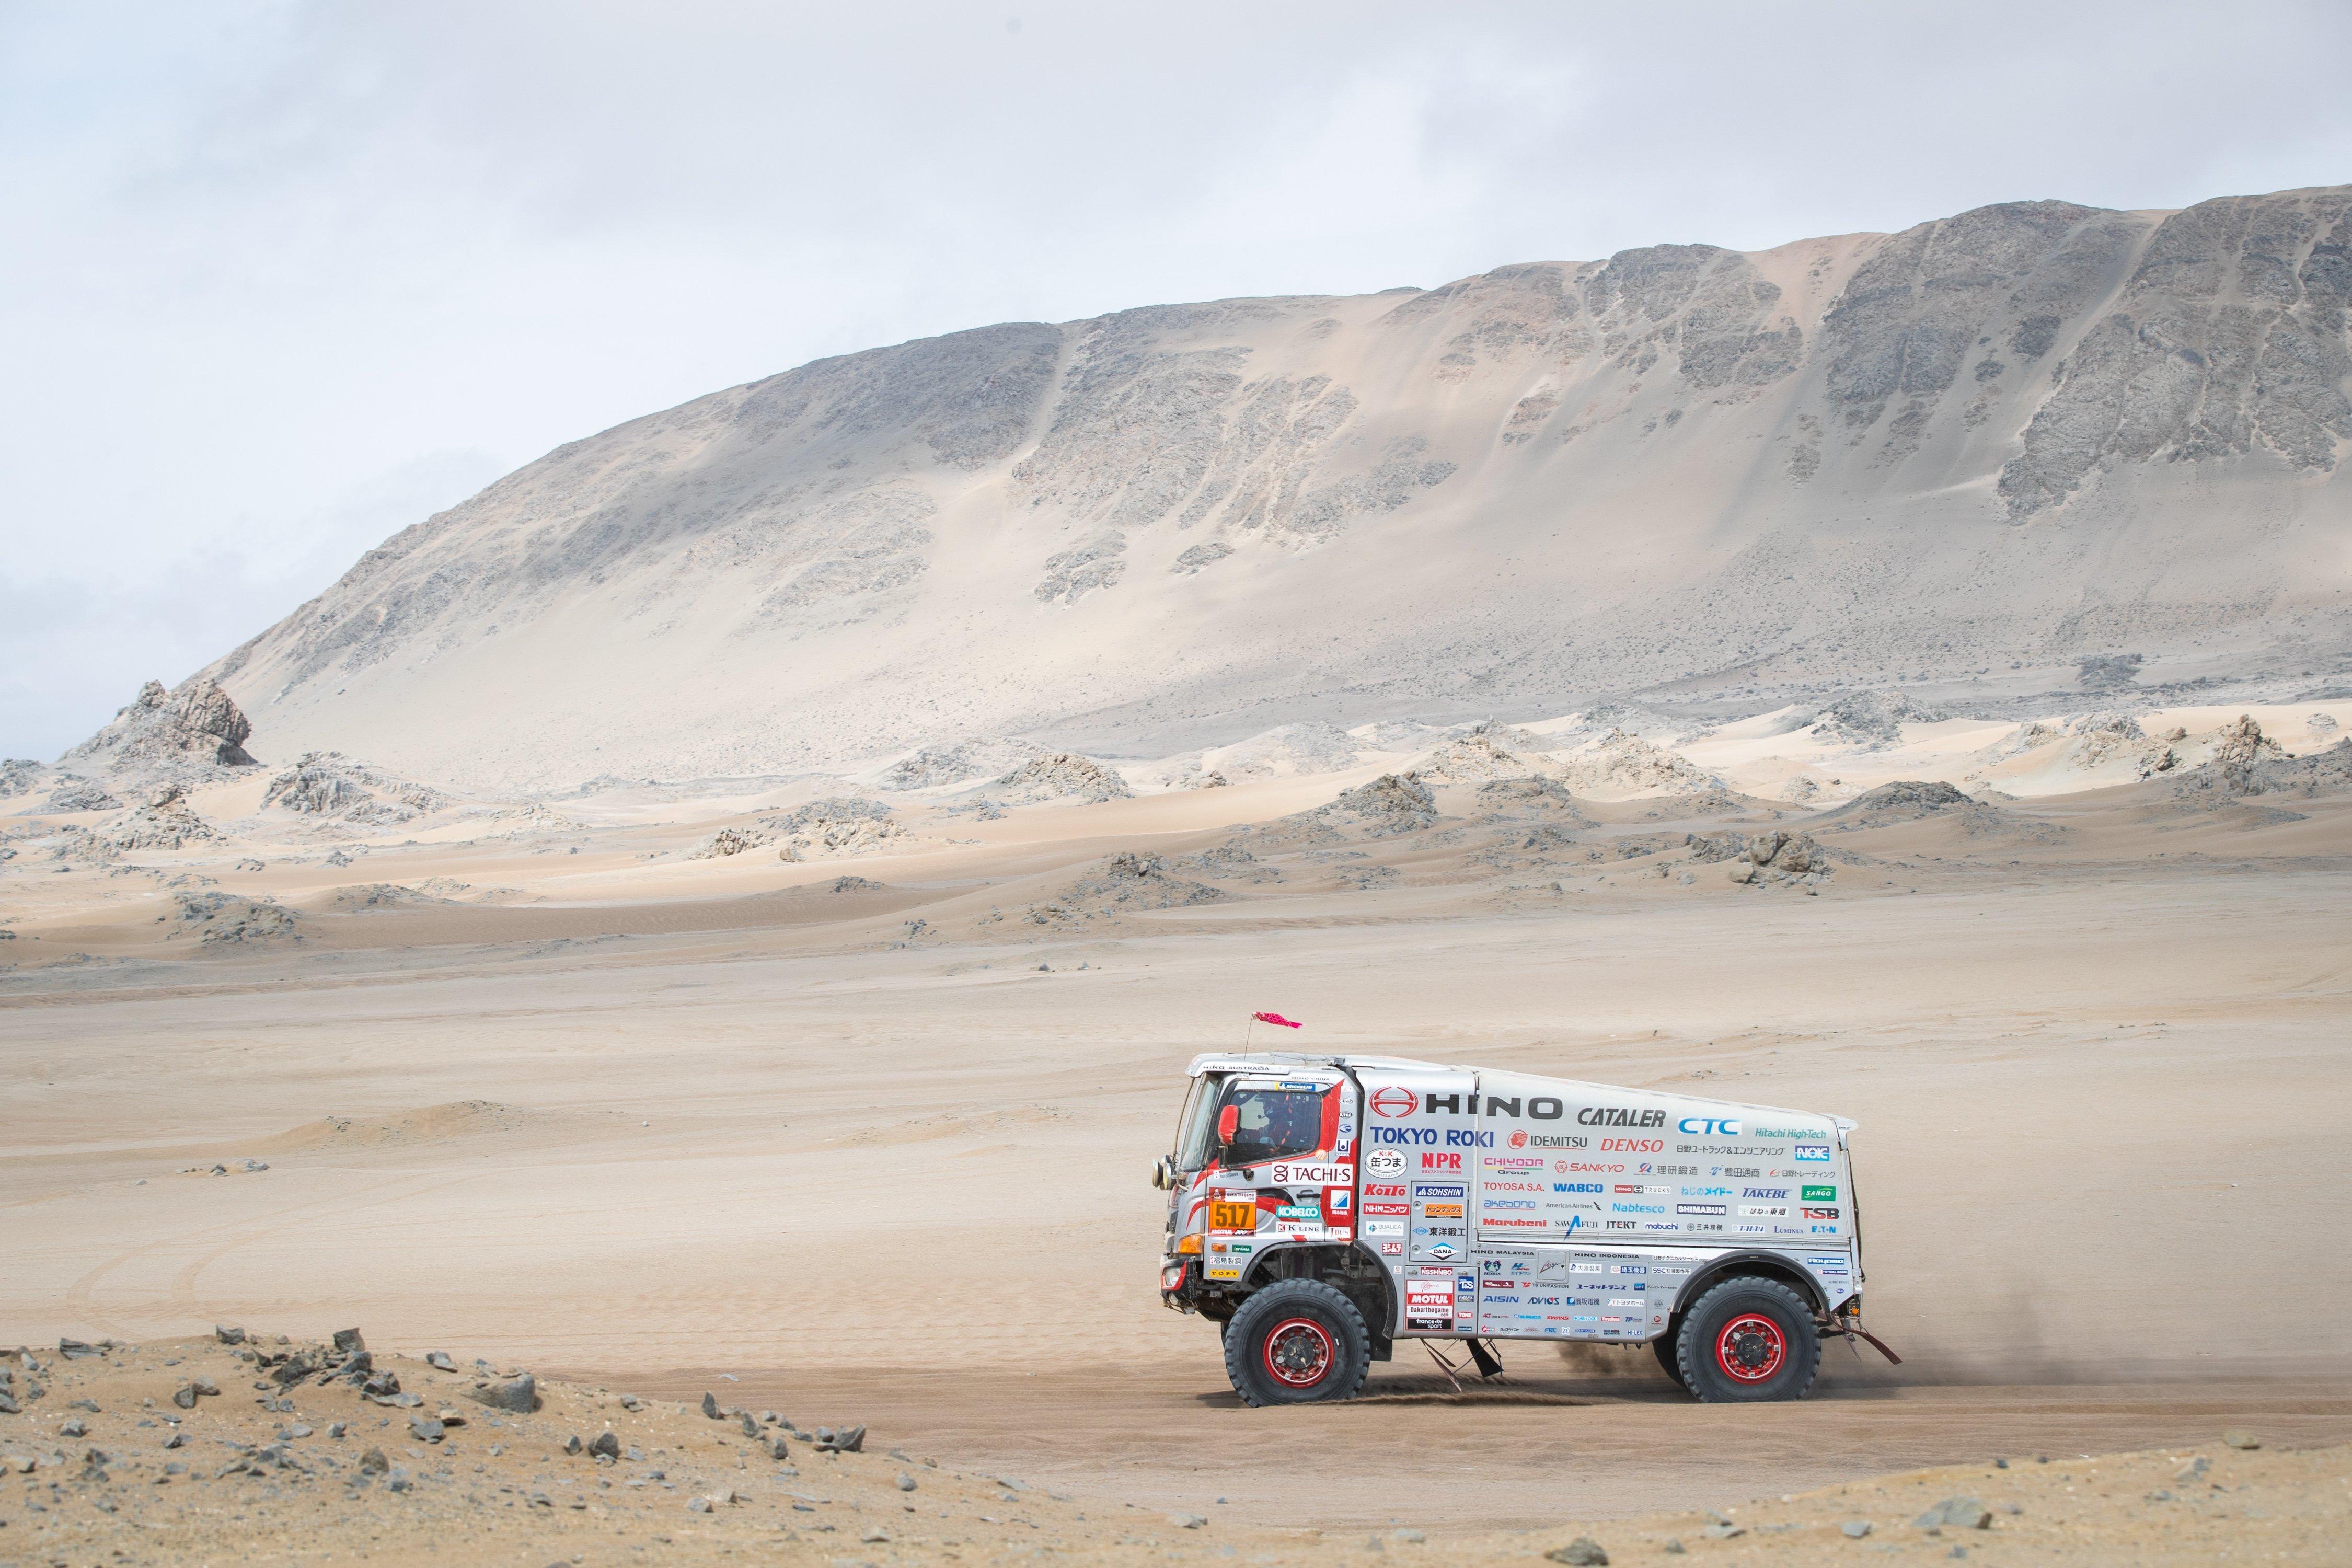 [DAY 10: Stage 8] Car 2 Climbs to 8th Position Despite Being Stuck. Car 1 Is On Course in the Semi-Marathon.